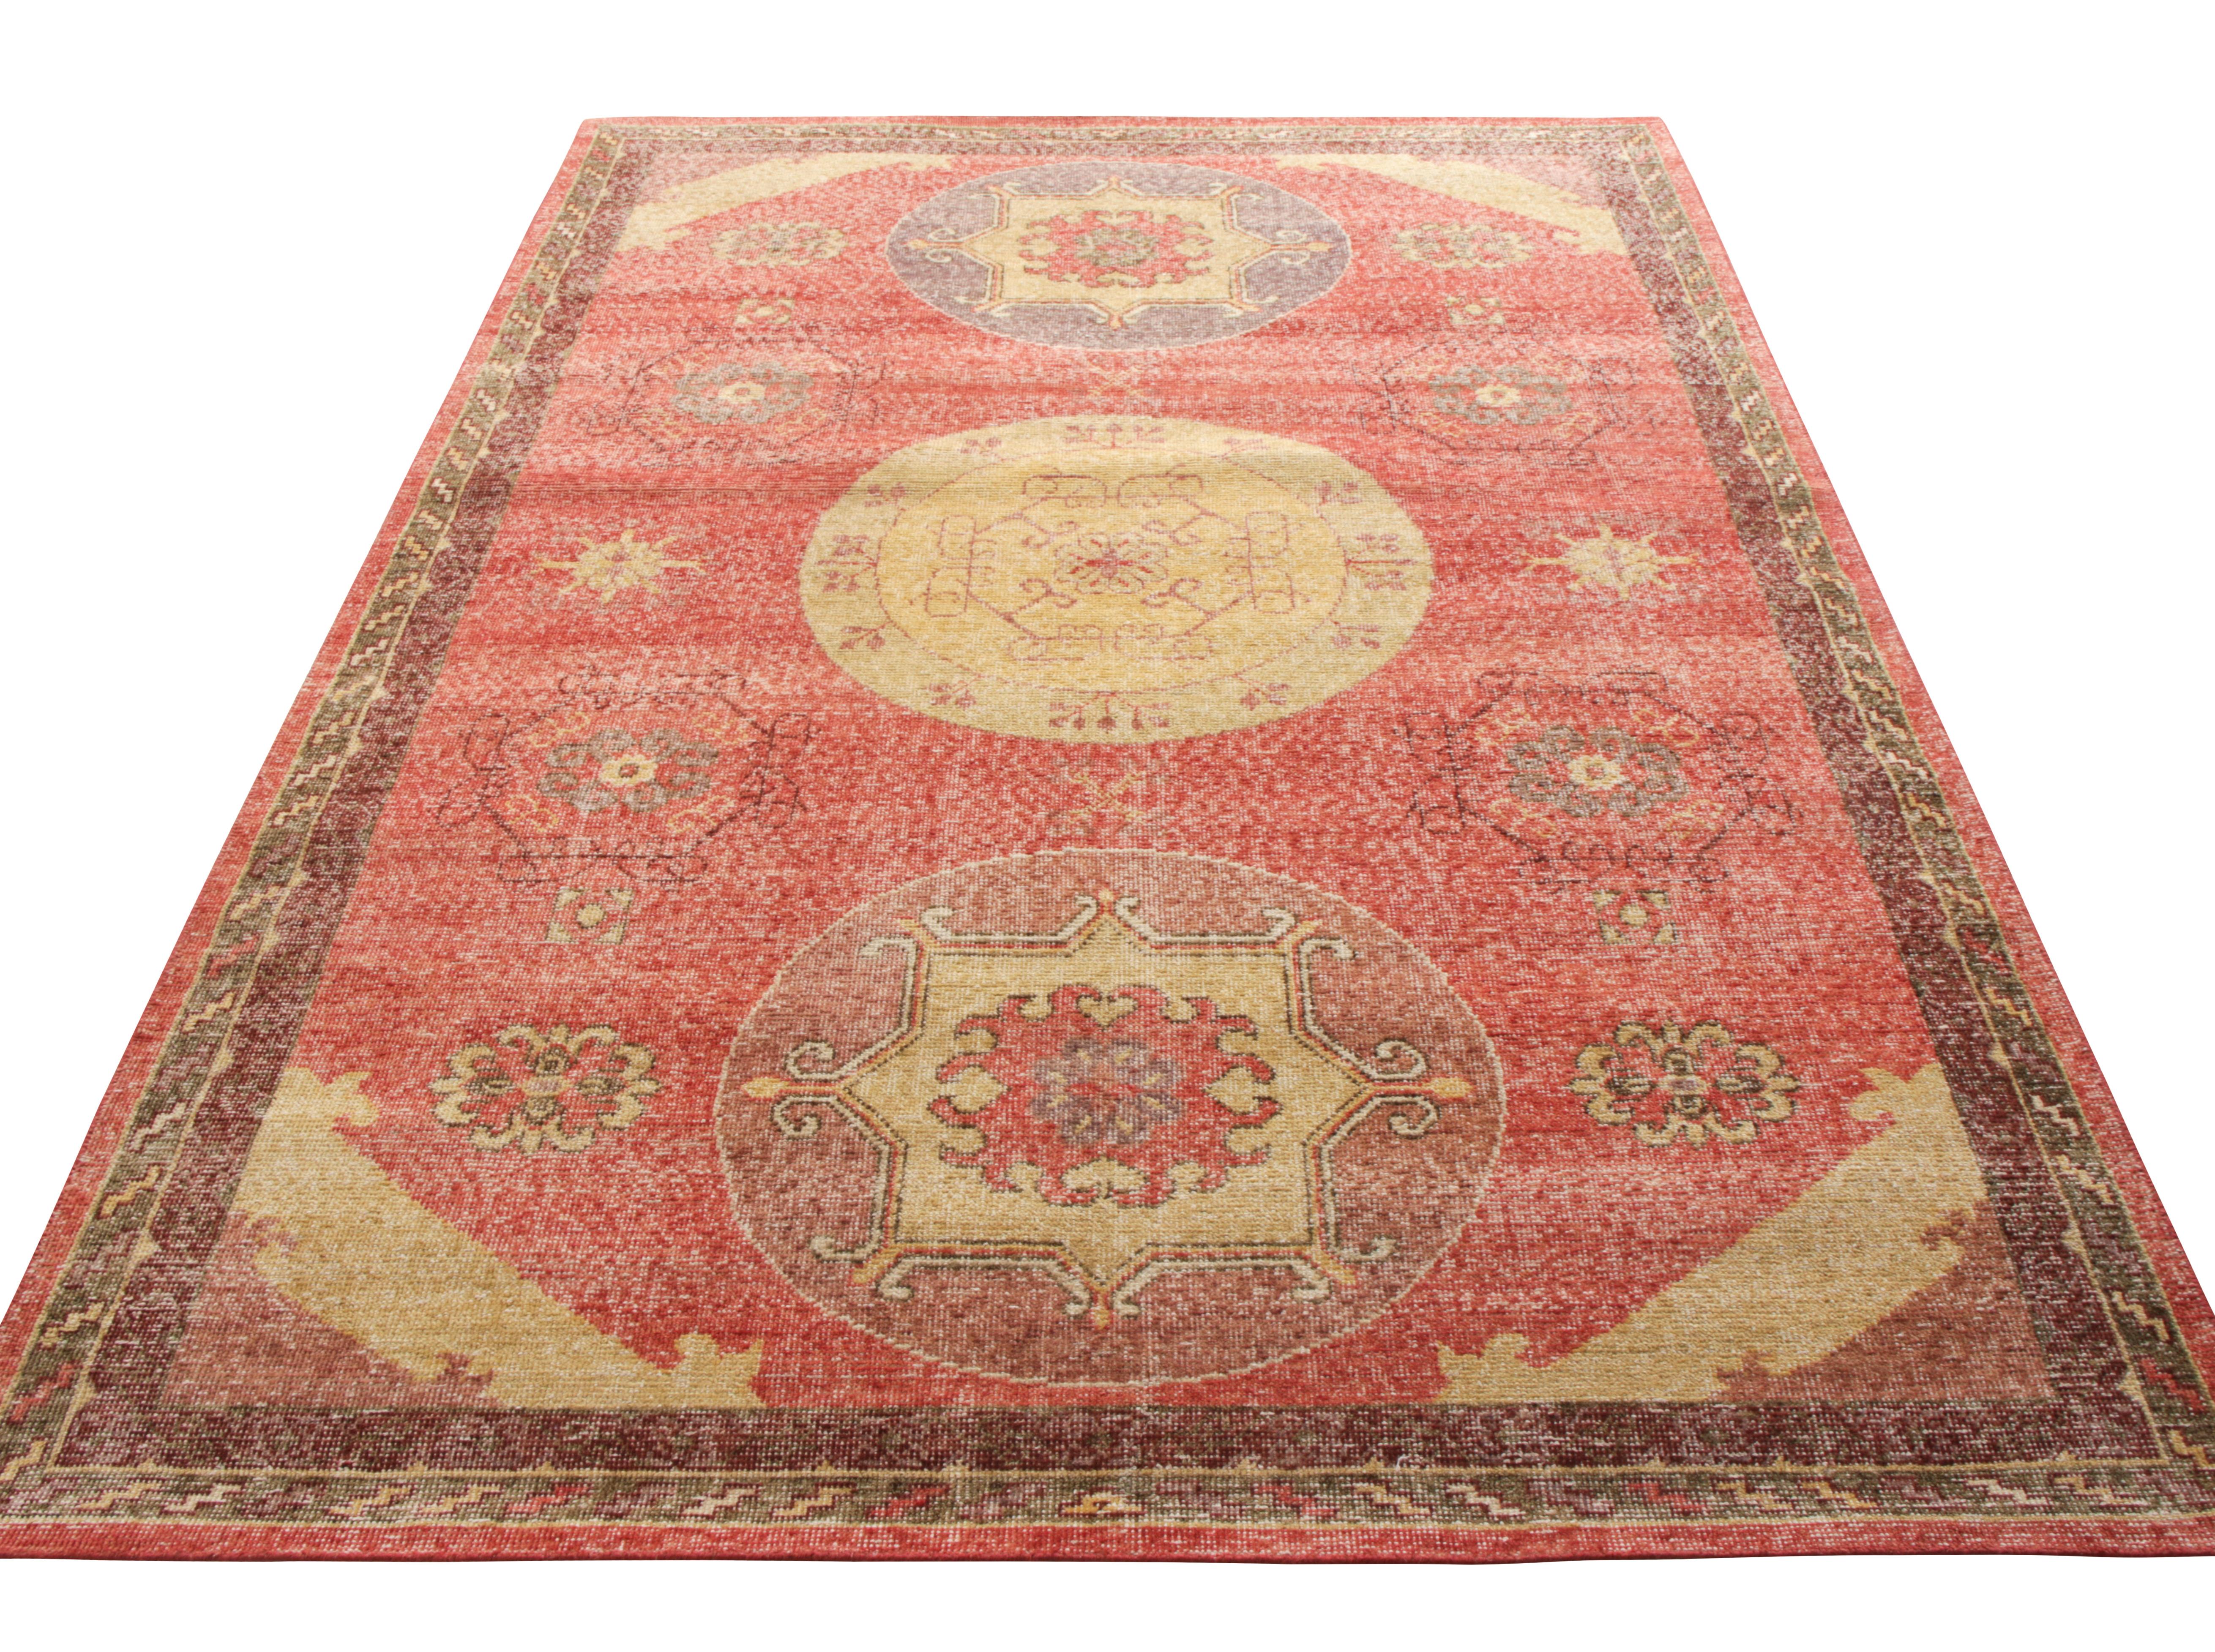 A rich hand knotted wool custom rug design from Rug & Kilim’s Homage Collection. Exemplified in this 6x9 edition, this distressed style rug witnesses a cheerful play of red and beige-gold tones gracefully complimenting the intricate medallion